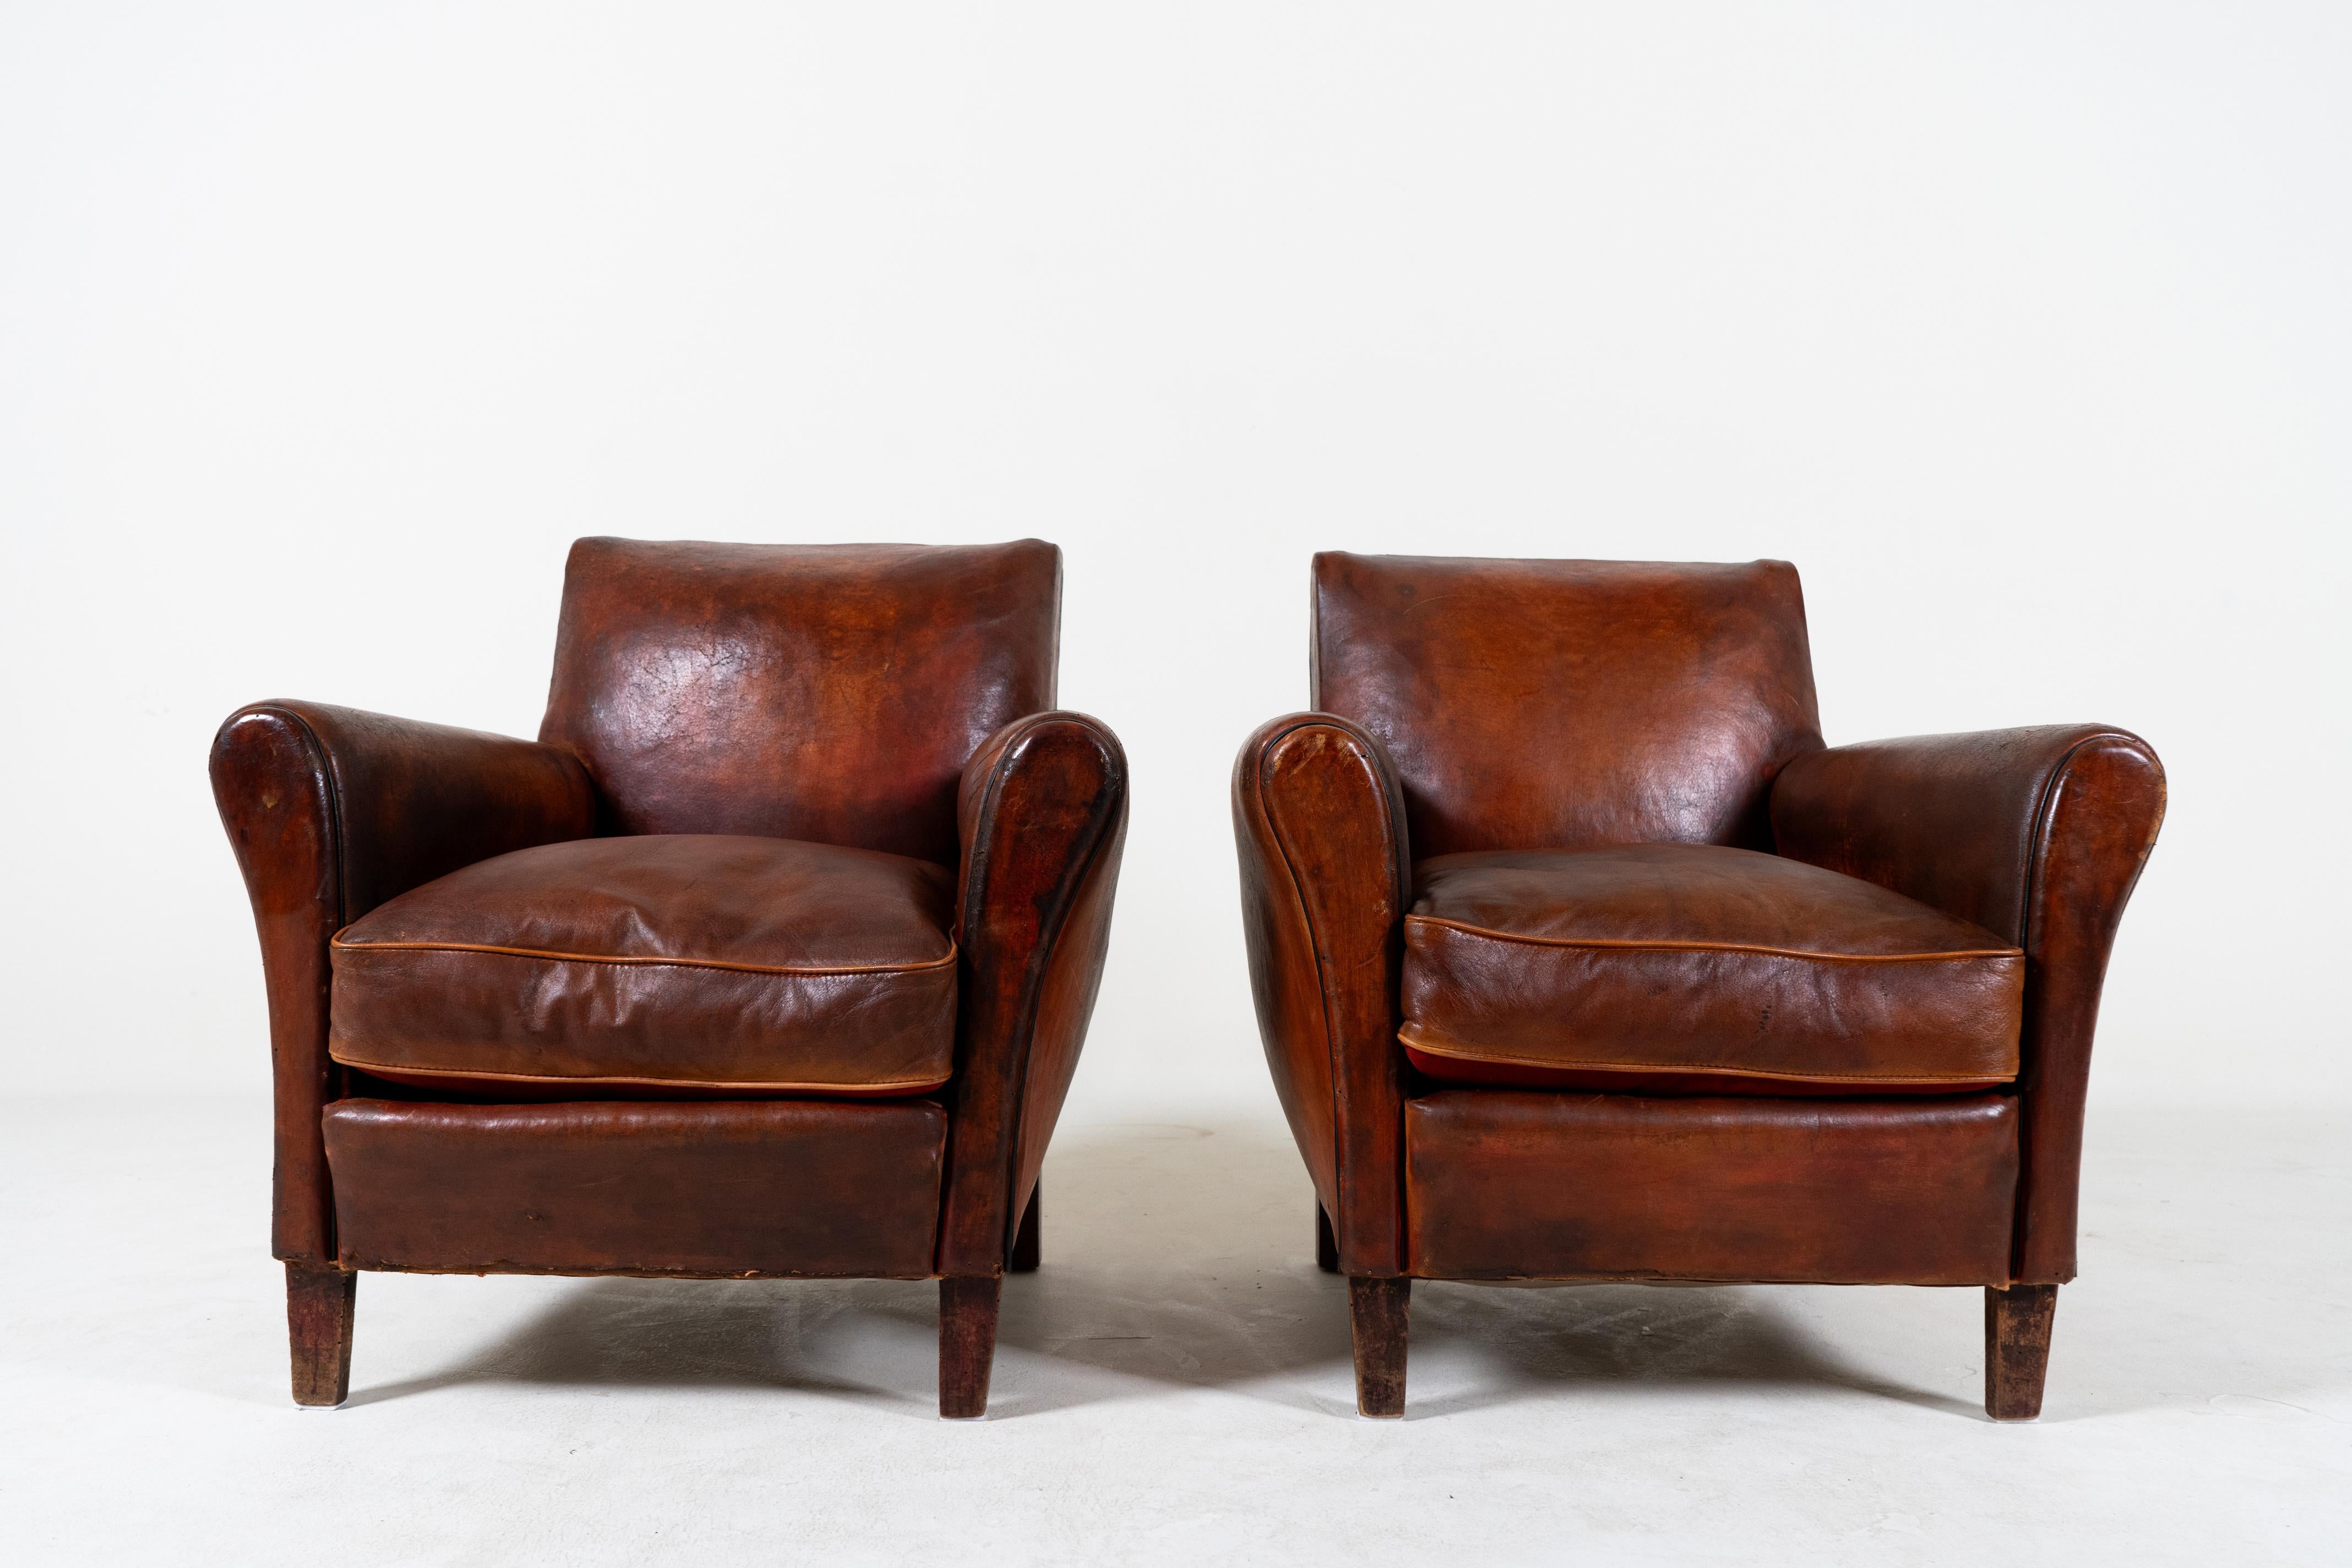 A Vintage Pair of Leather Club Chairs, France 1940 For Sale 3